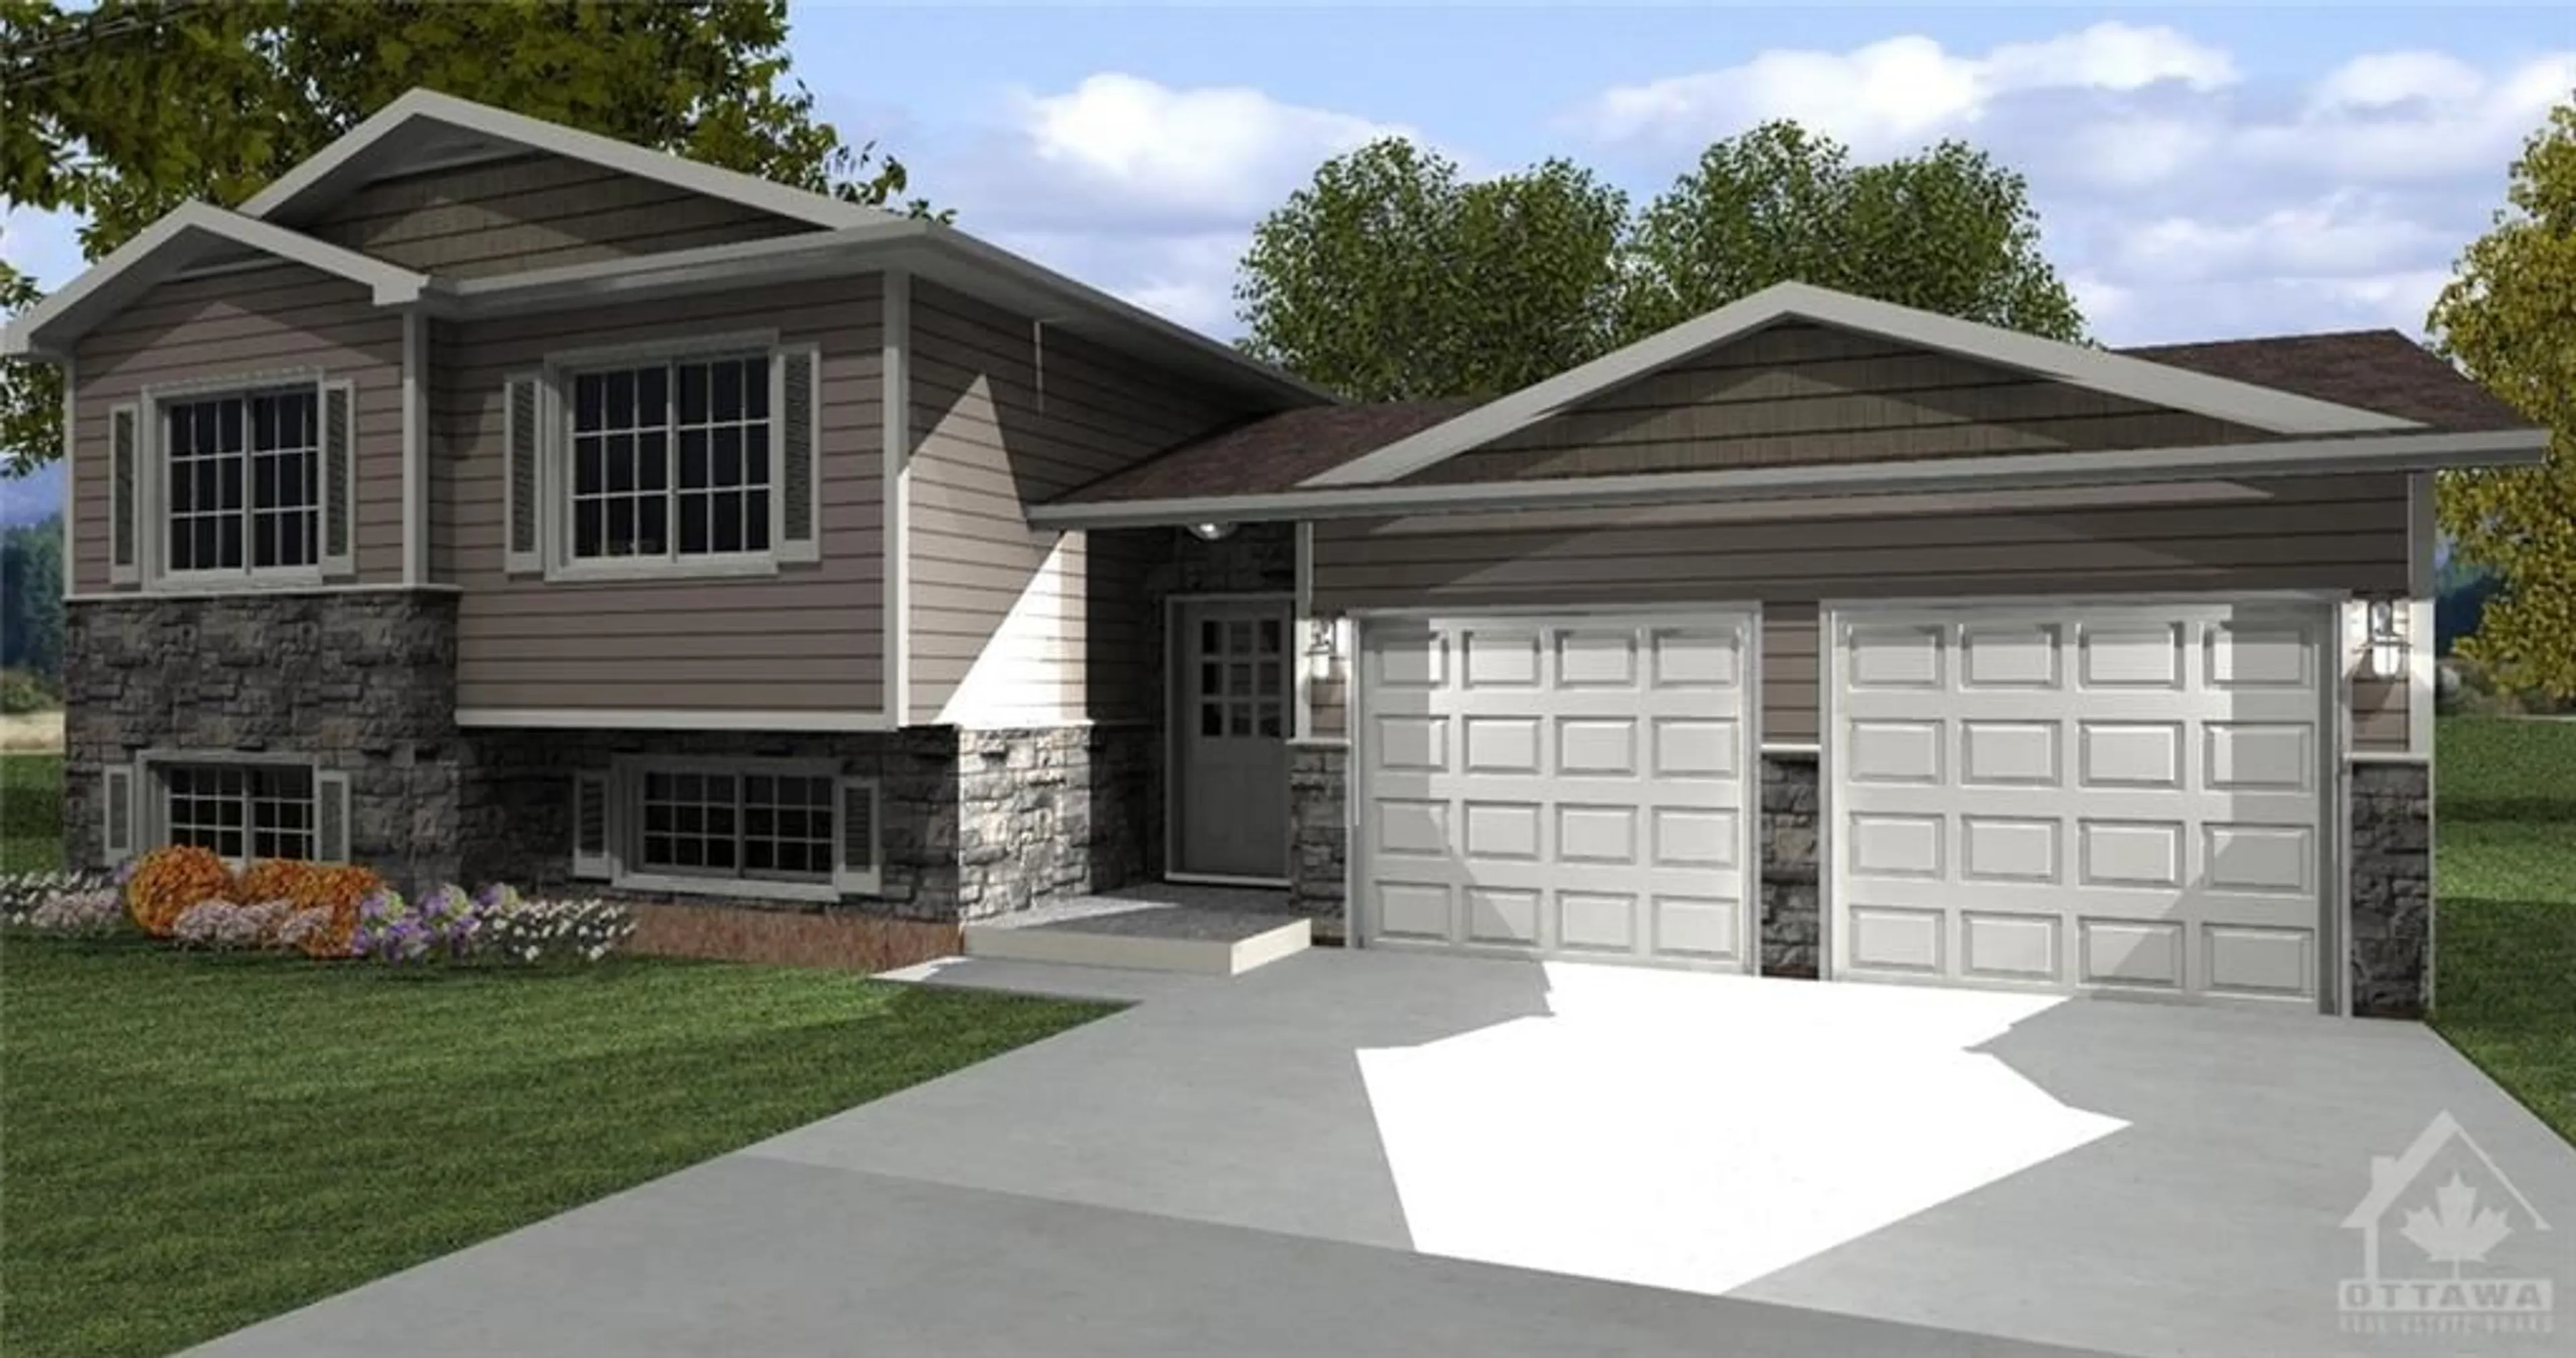 Home with vinyl exterior material for Lot 48-B PINERY Rd, Montague Ontario K7A 4S6